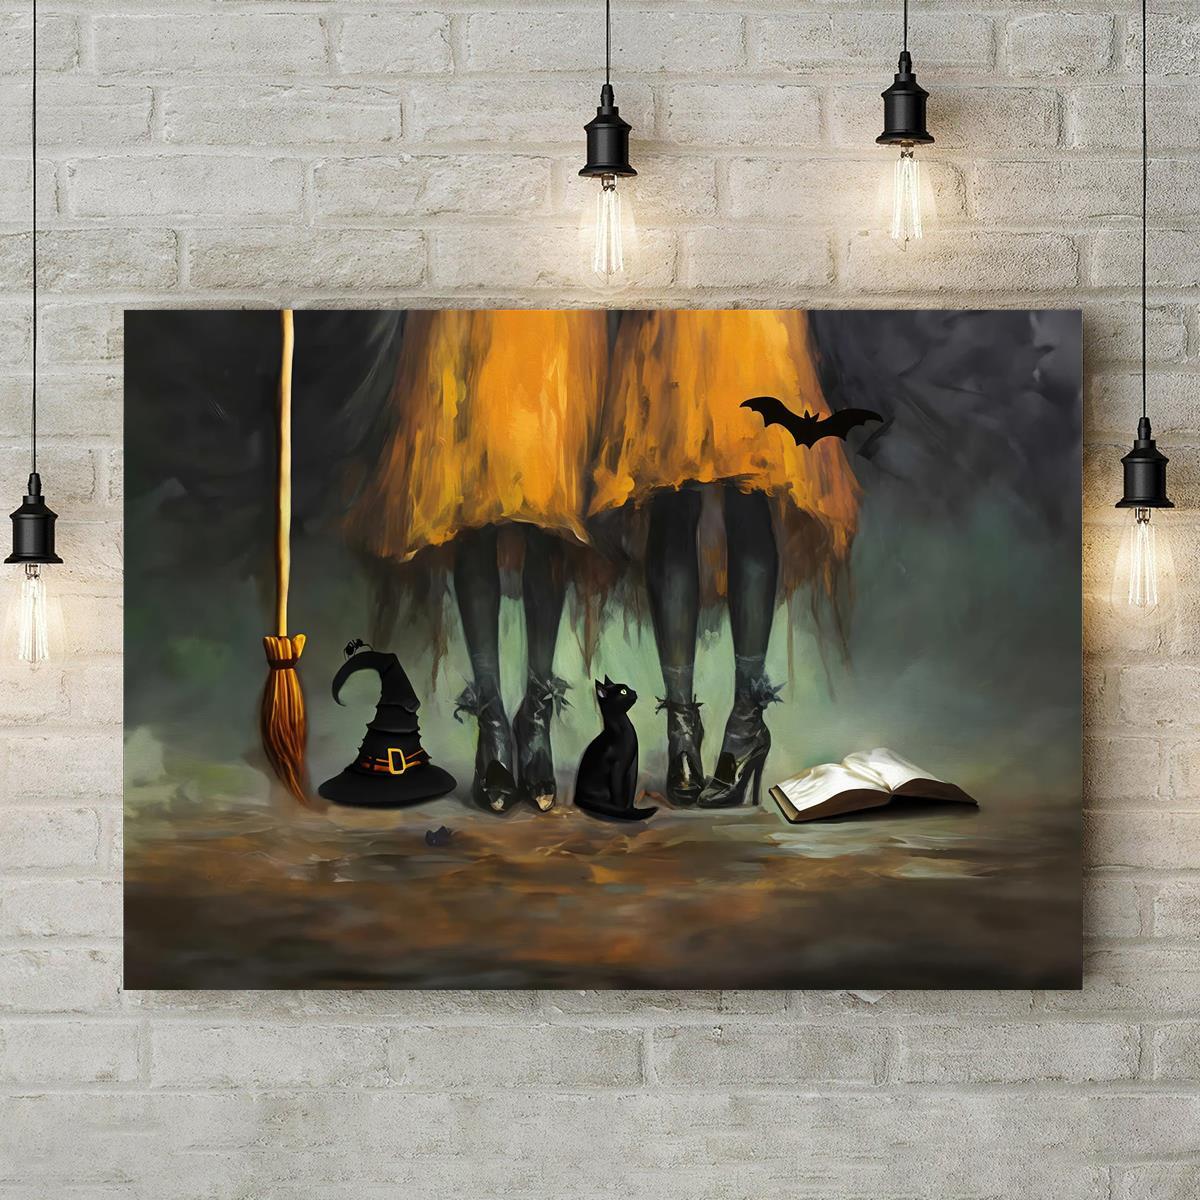 

1pc Unframed Vintage Witch Canvas Art Poster - Halloween Oil Painting Print, Art Deco Style, Waterproof Wall Art For Home Office, Bedroom, Dining Room Decor